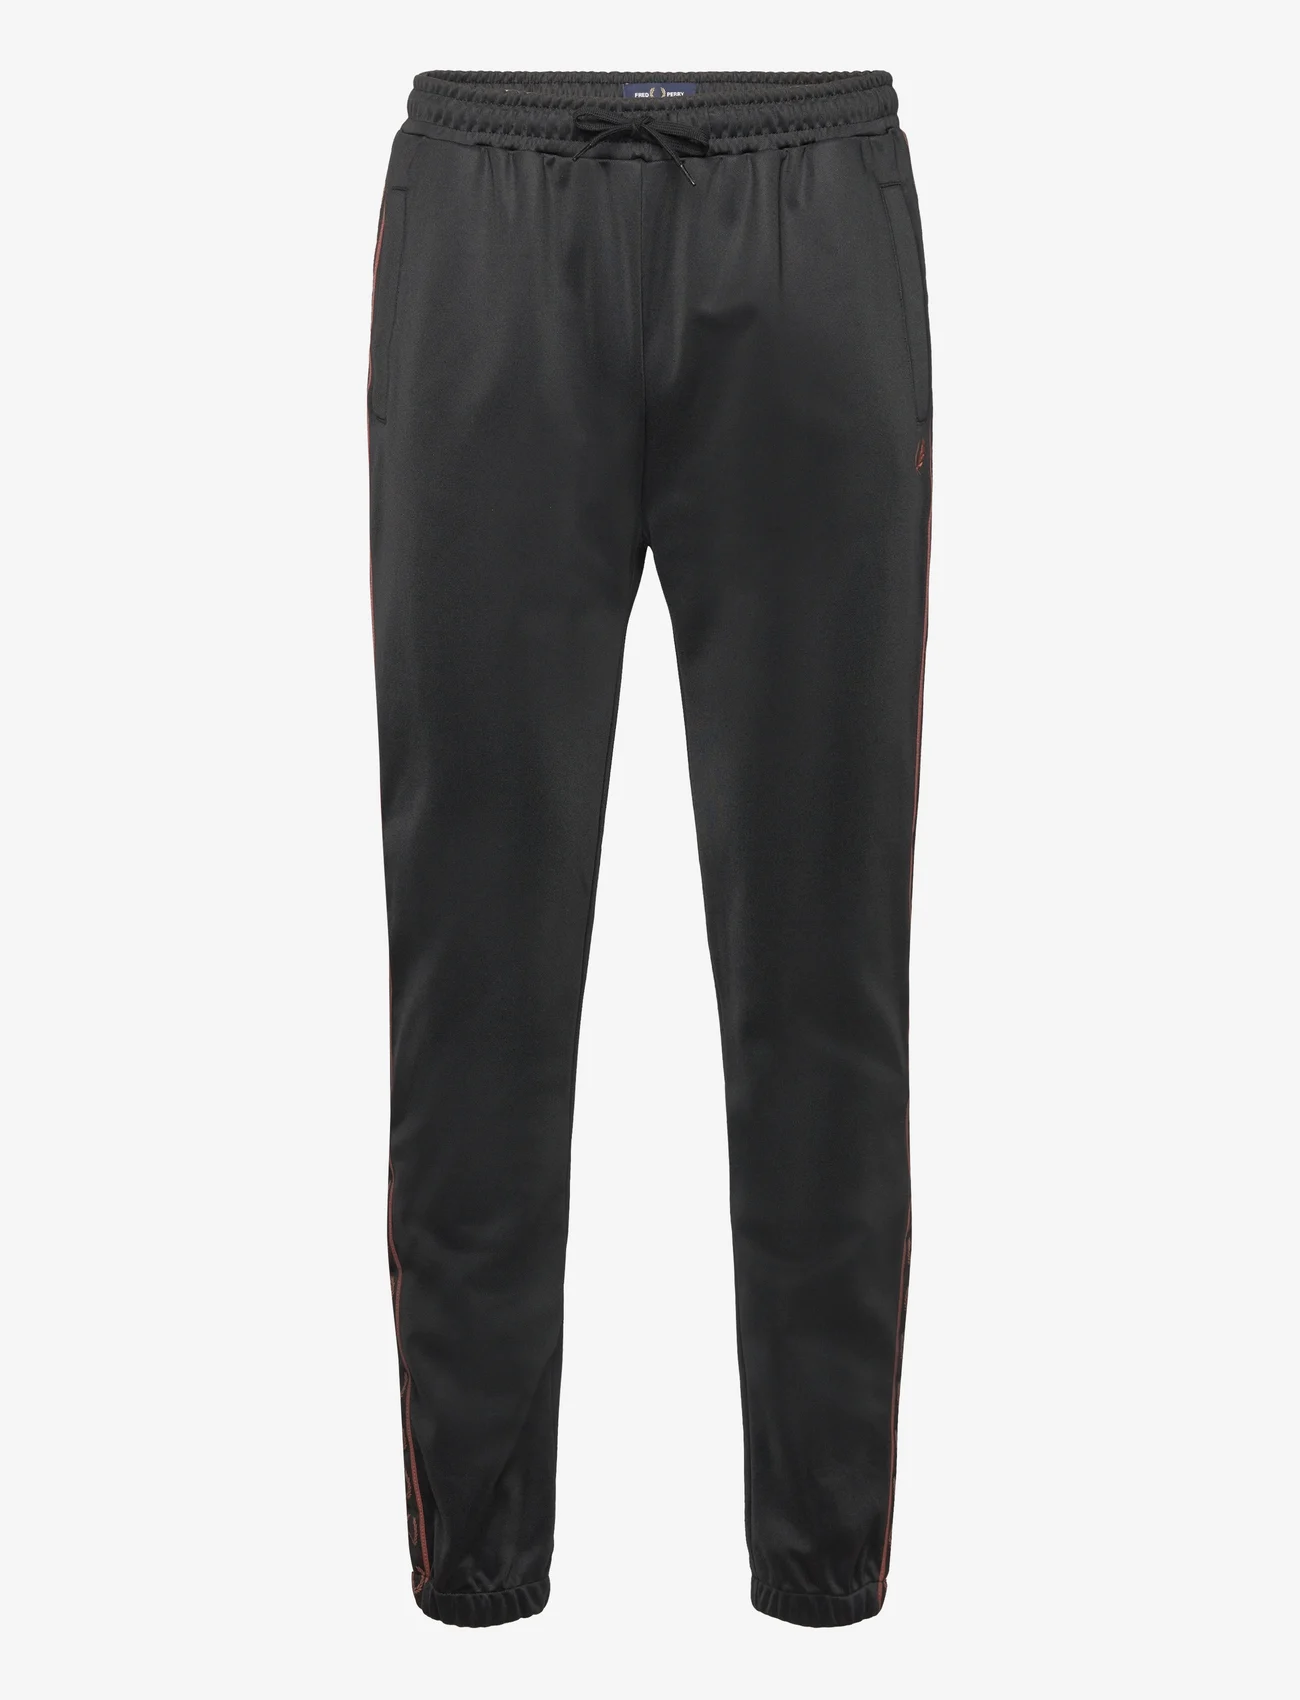 Fred Perry - CONTRAST TAPE TRACK PANT - sweatpants - black/whiskybrwn - 0